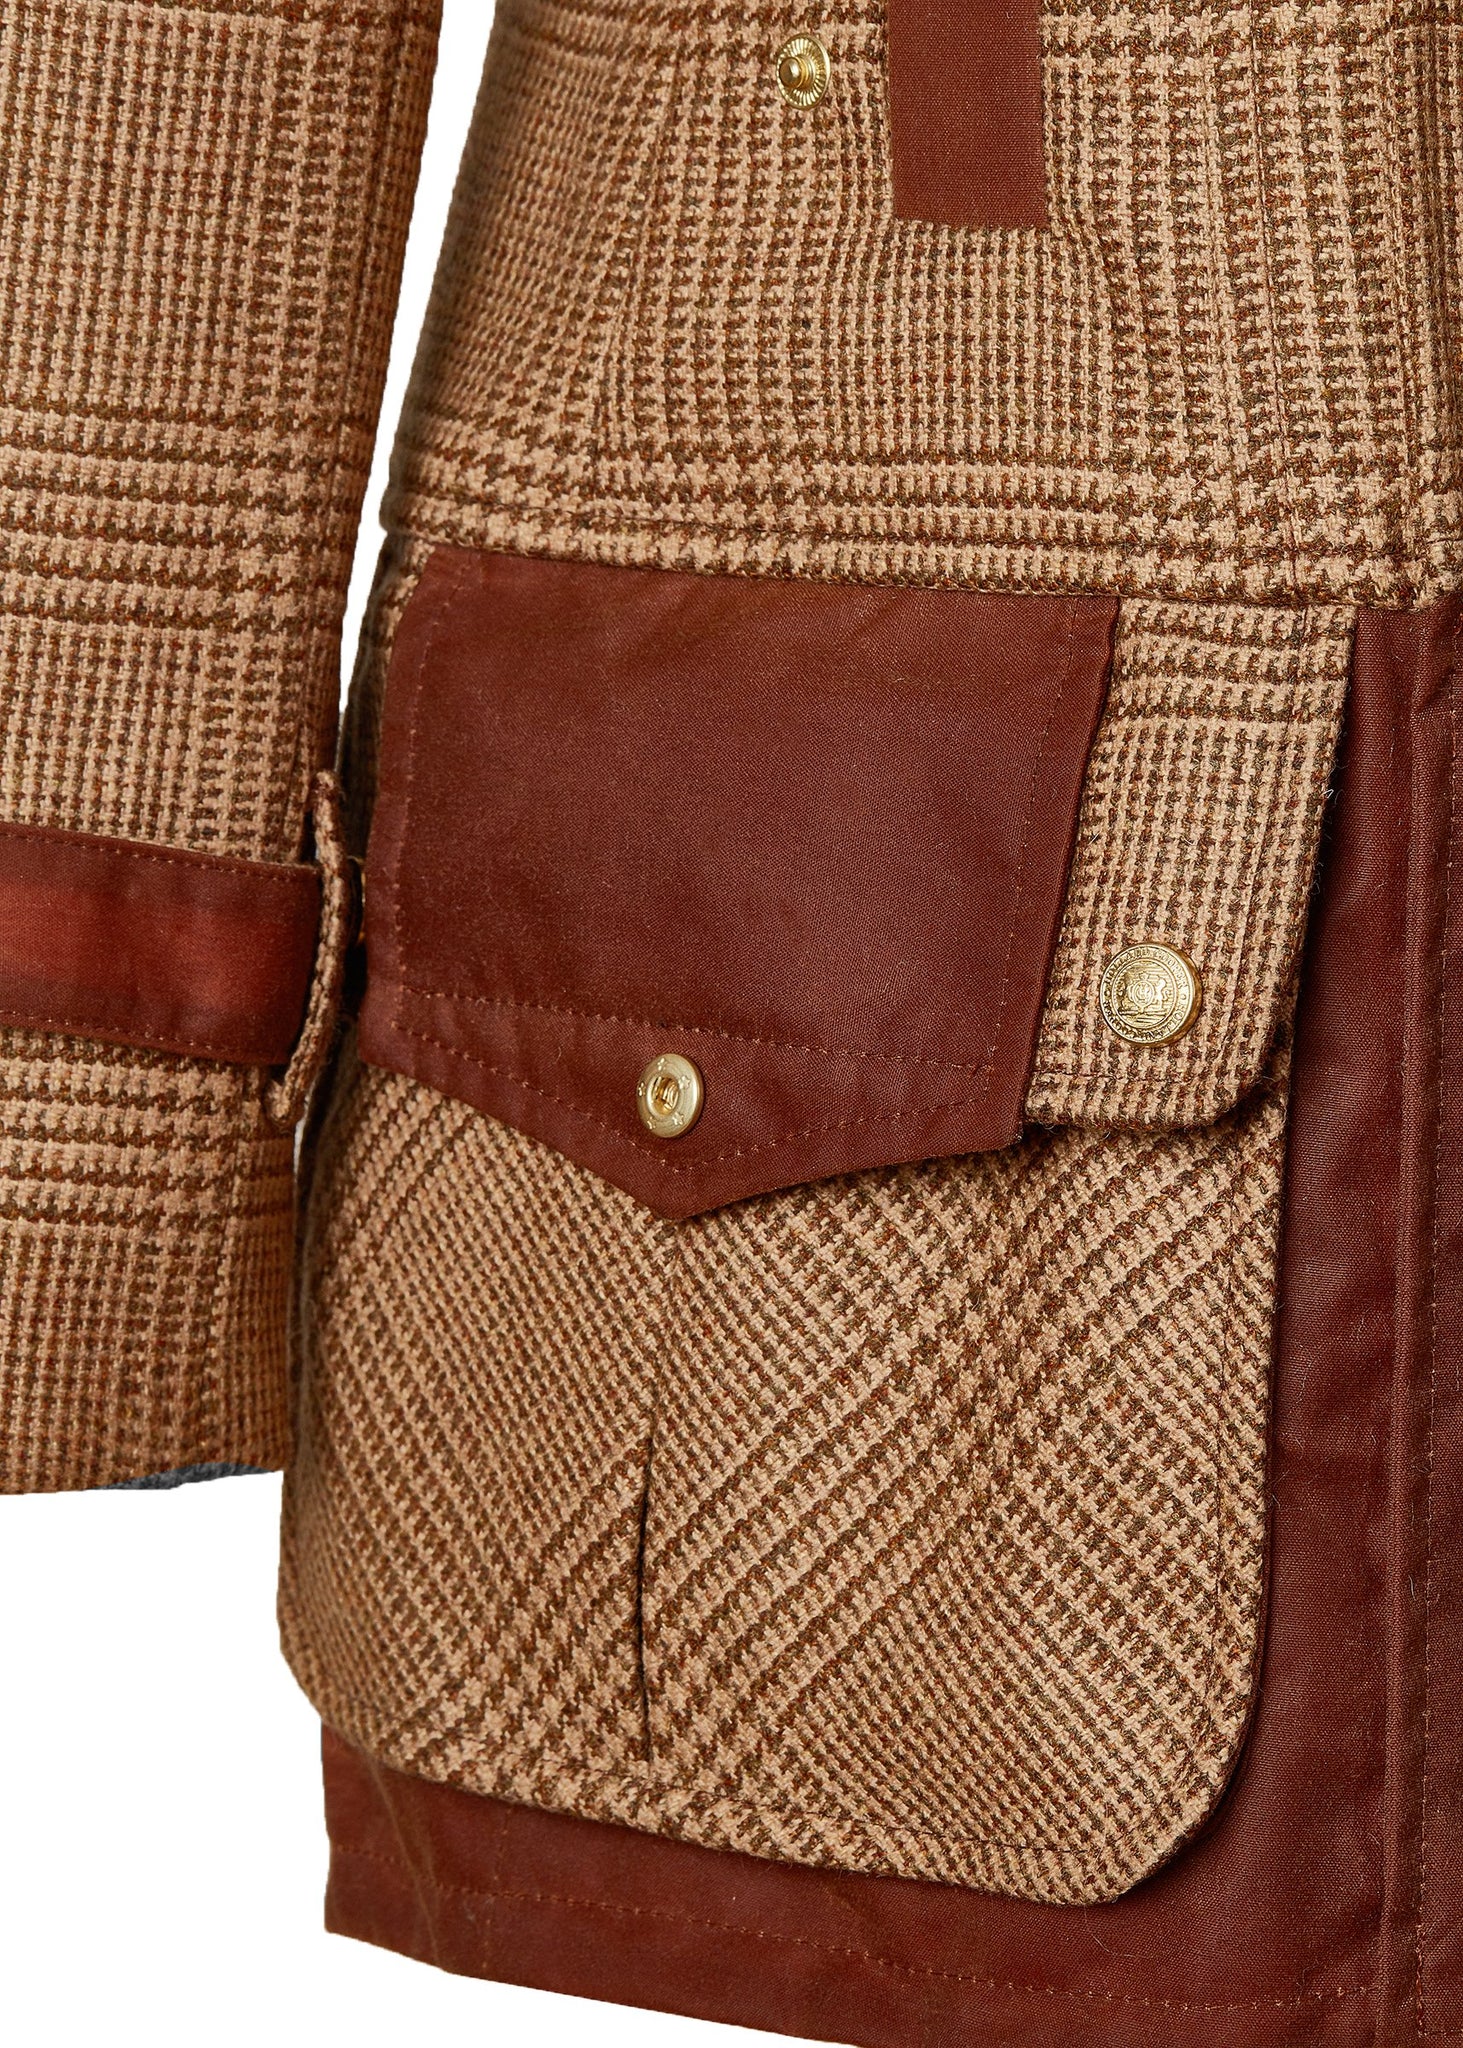 pocket detail on hip of womens fitted field jacket in tawny and brown check tweed trimmed with contrast tan wax fabric on shoulder across back and on the hip with faux fur trim around the neck finished with horn button fastenings an buckles on the collar cuffs and hip